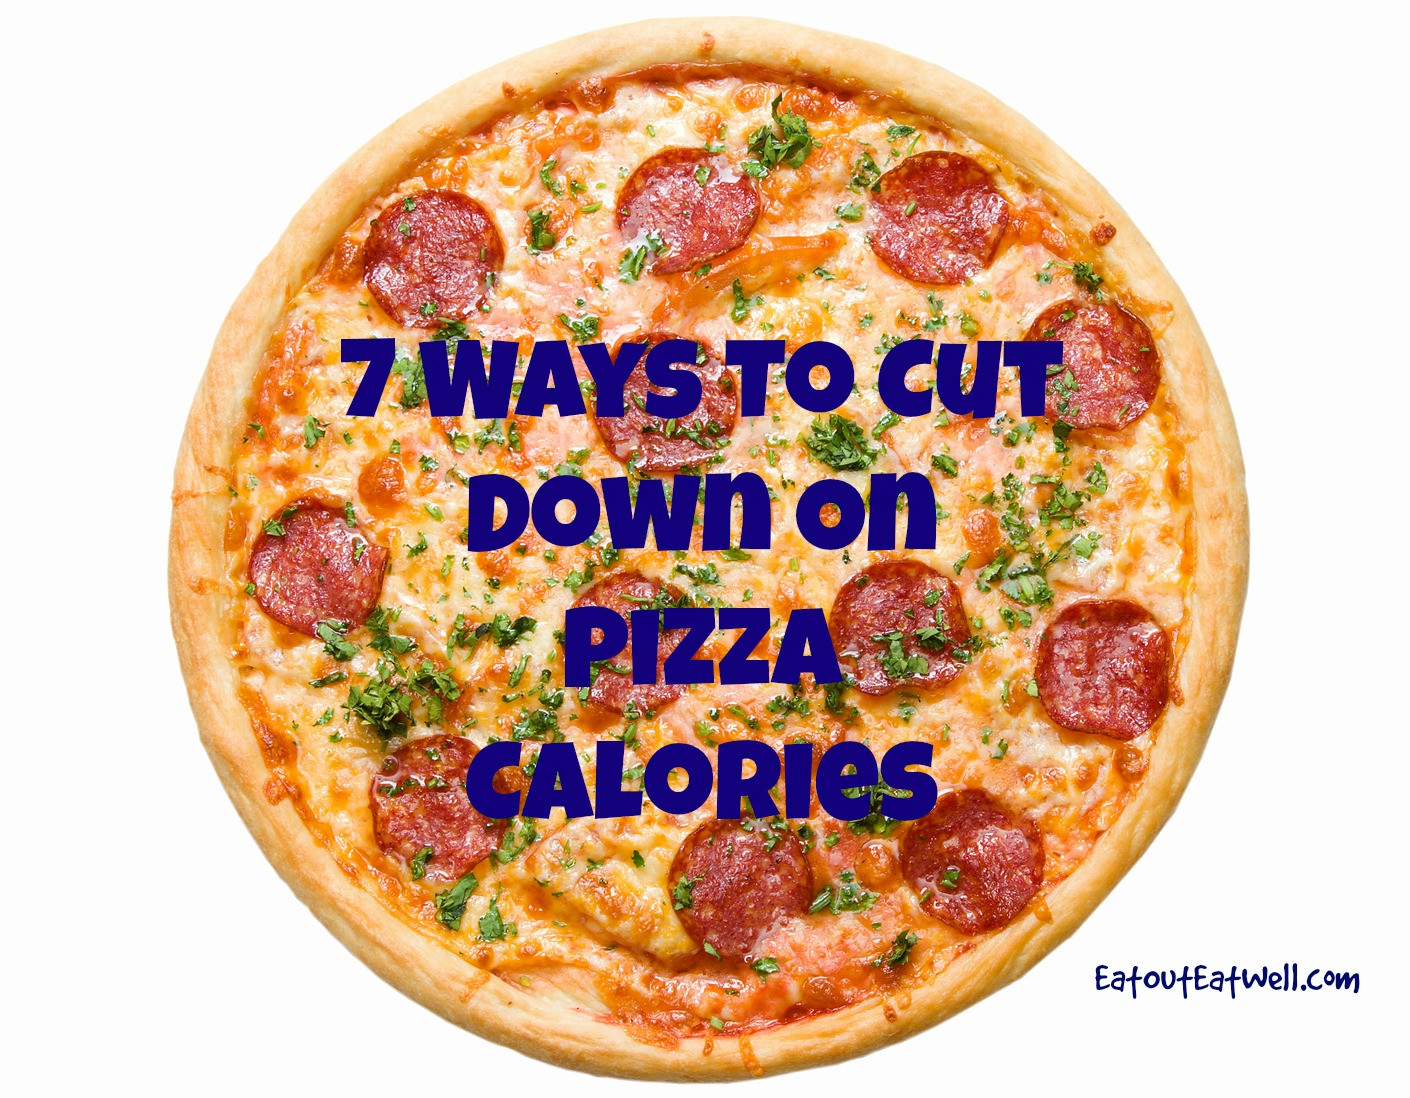 Domino'S Pepperoni Pizza Calories
 Seven Ways To Cut Down Pizza Calories Eat Out Eat Well